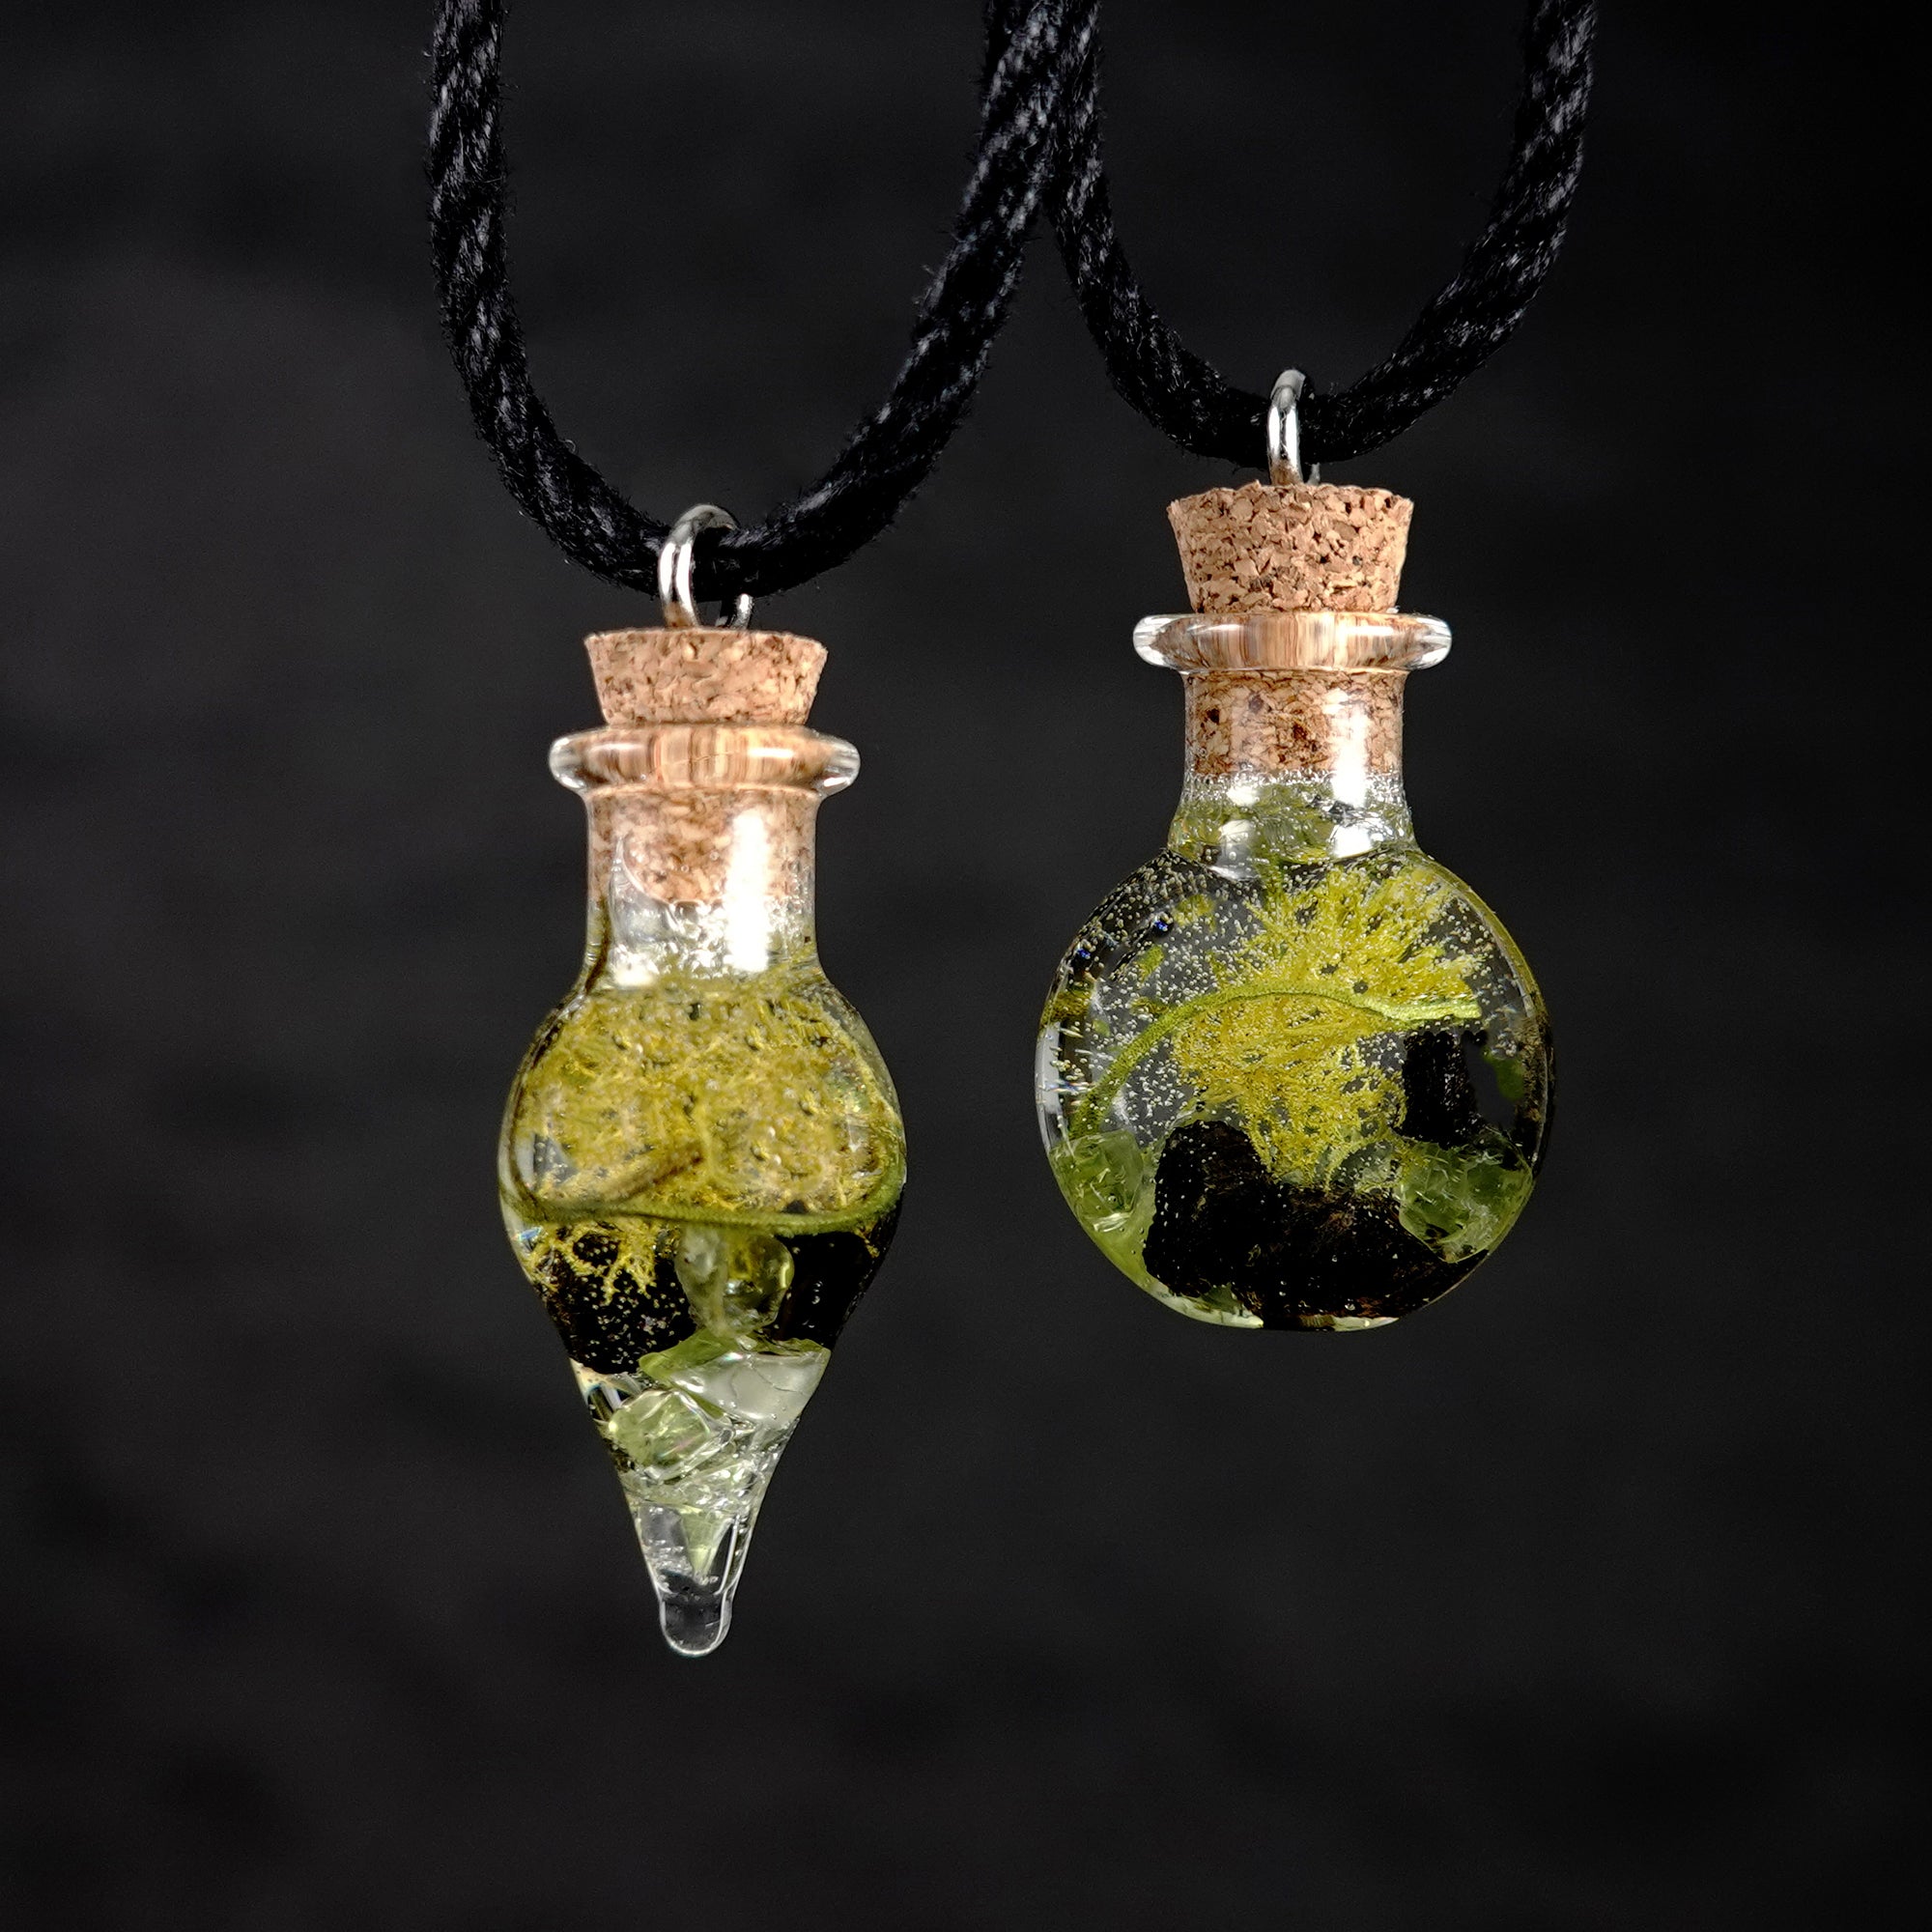 Moss Covered Rock Necklace